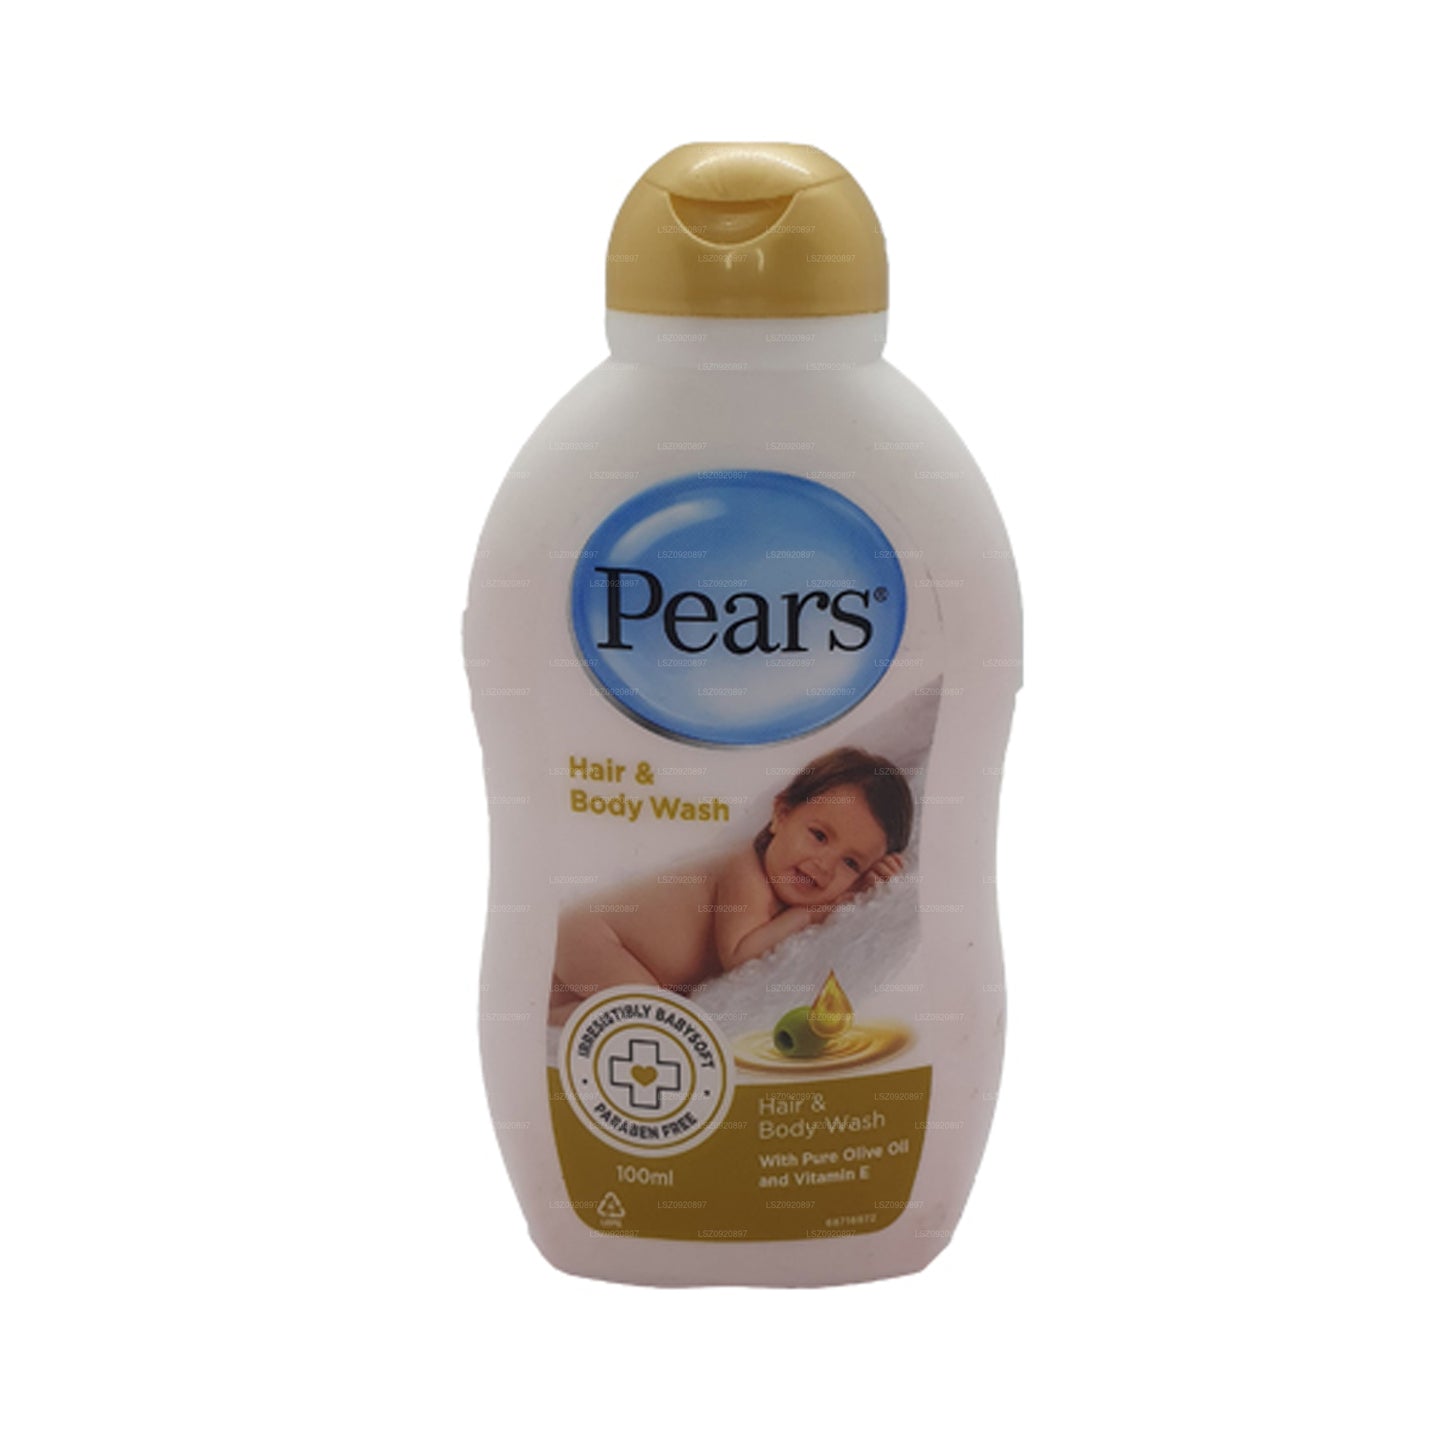 Pears Hair And Body Wash (100ml)